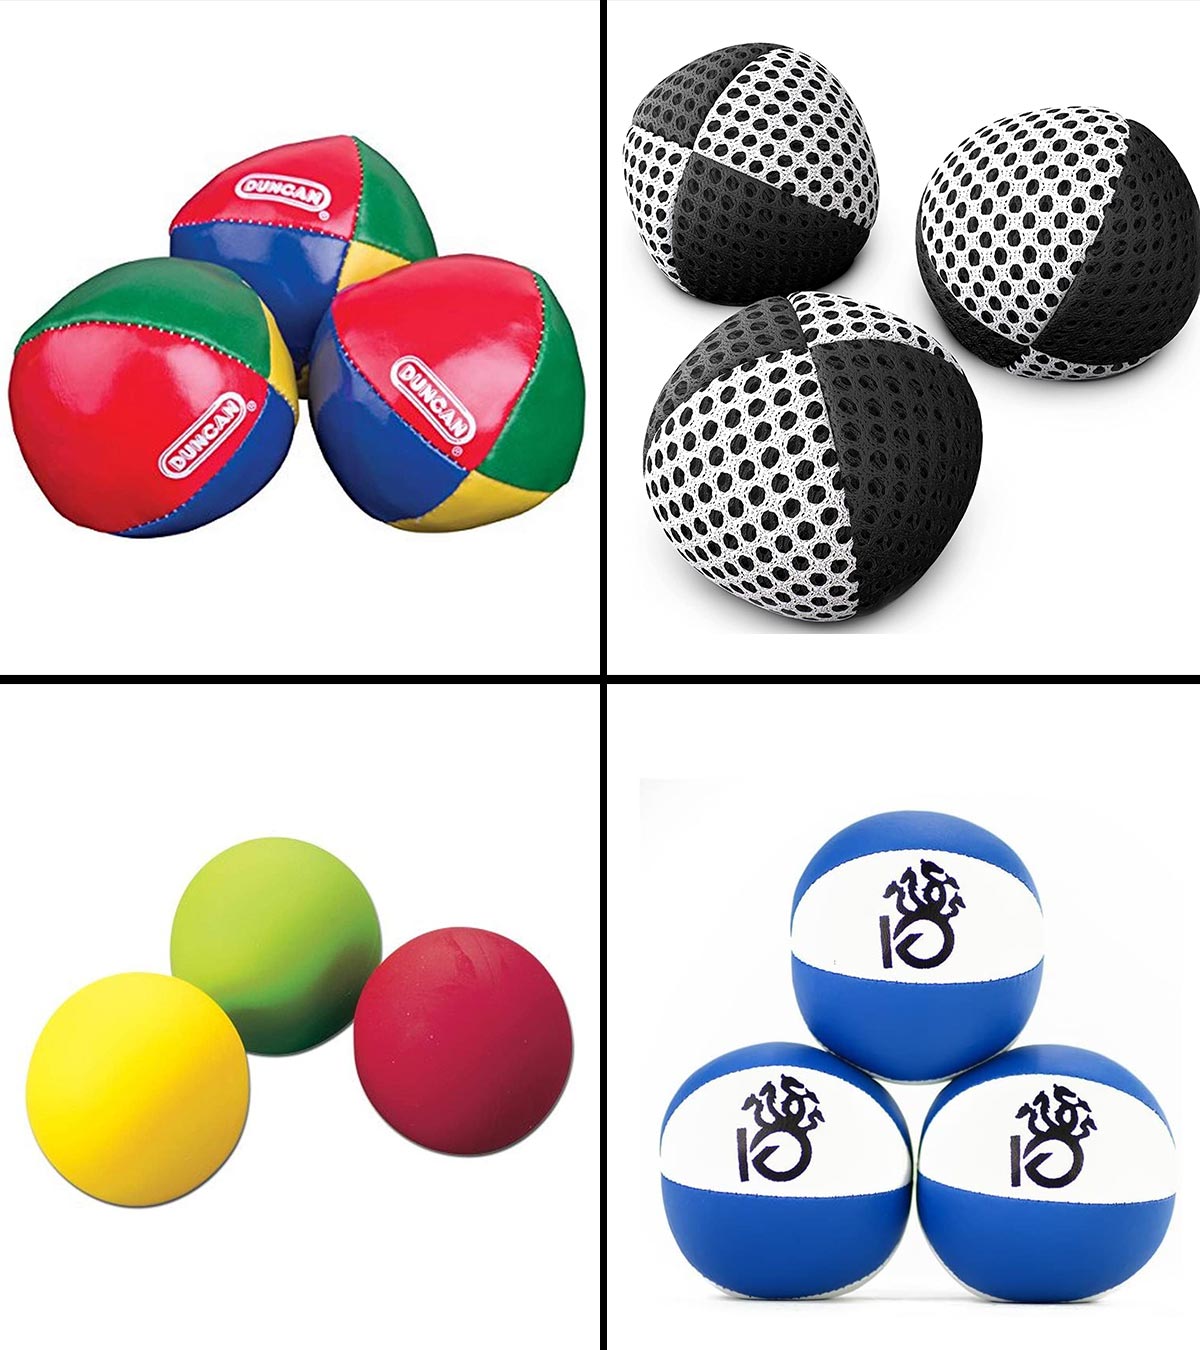 Details about   3PCS Juggling Balls for Adult Kid Beginners Professionals PU Leather Toys-Large 